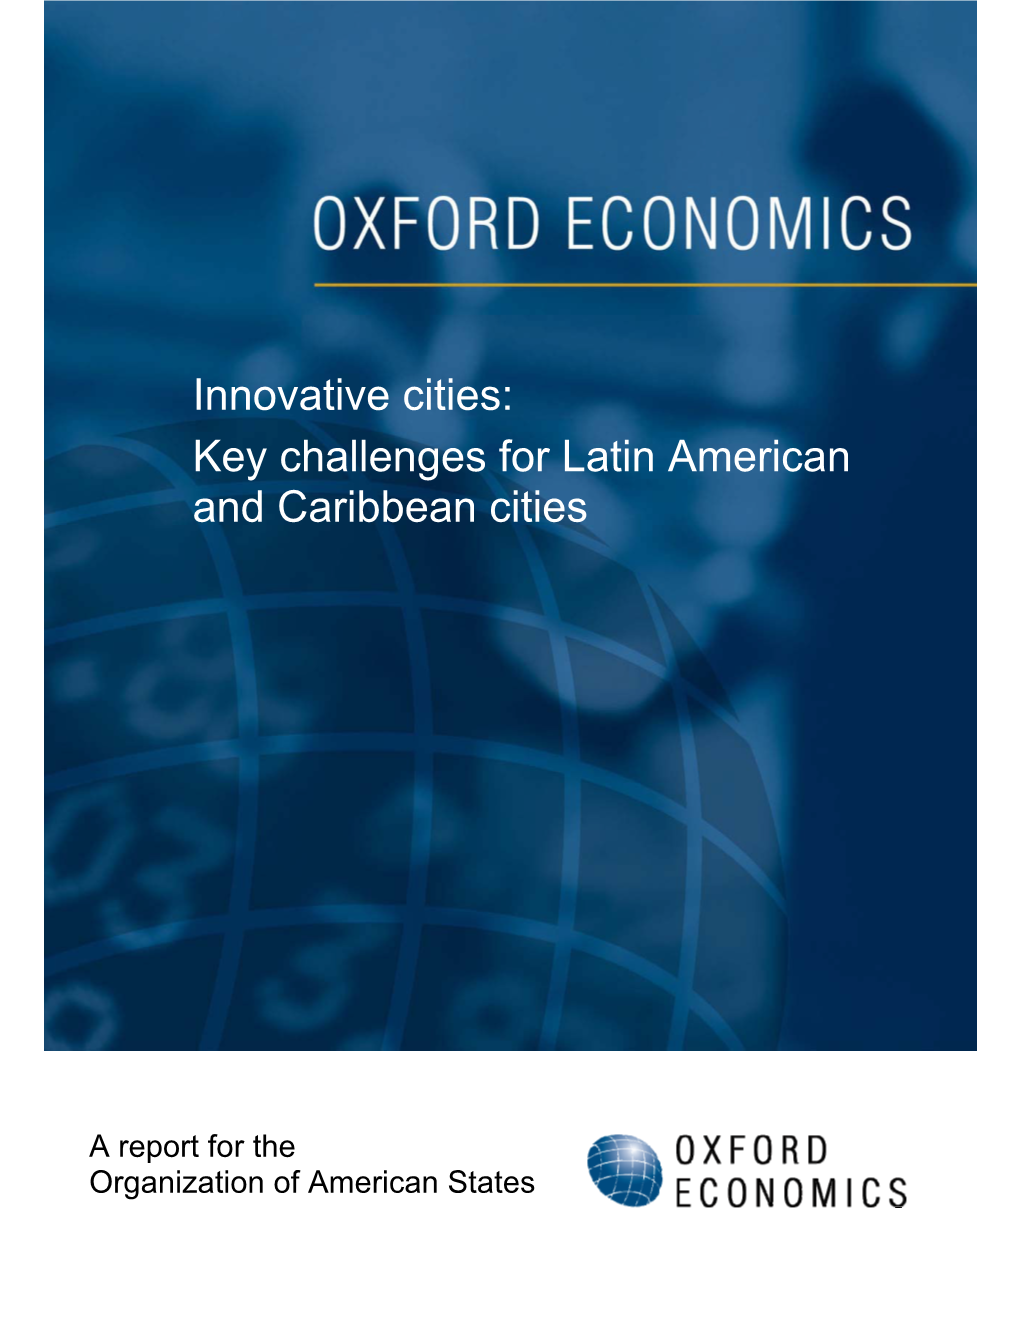 Innovative Cities: Key Challenges for Latin American and Caribbean Cities